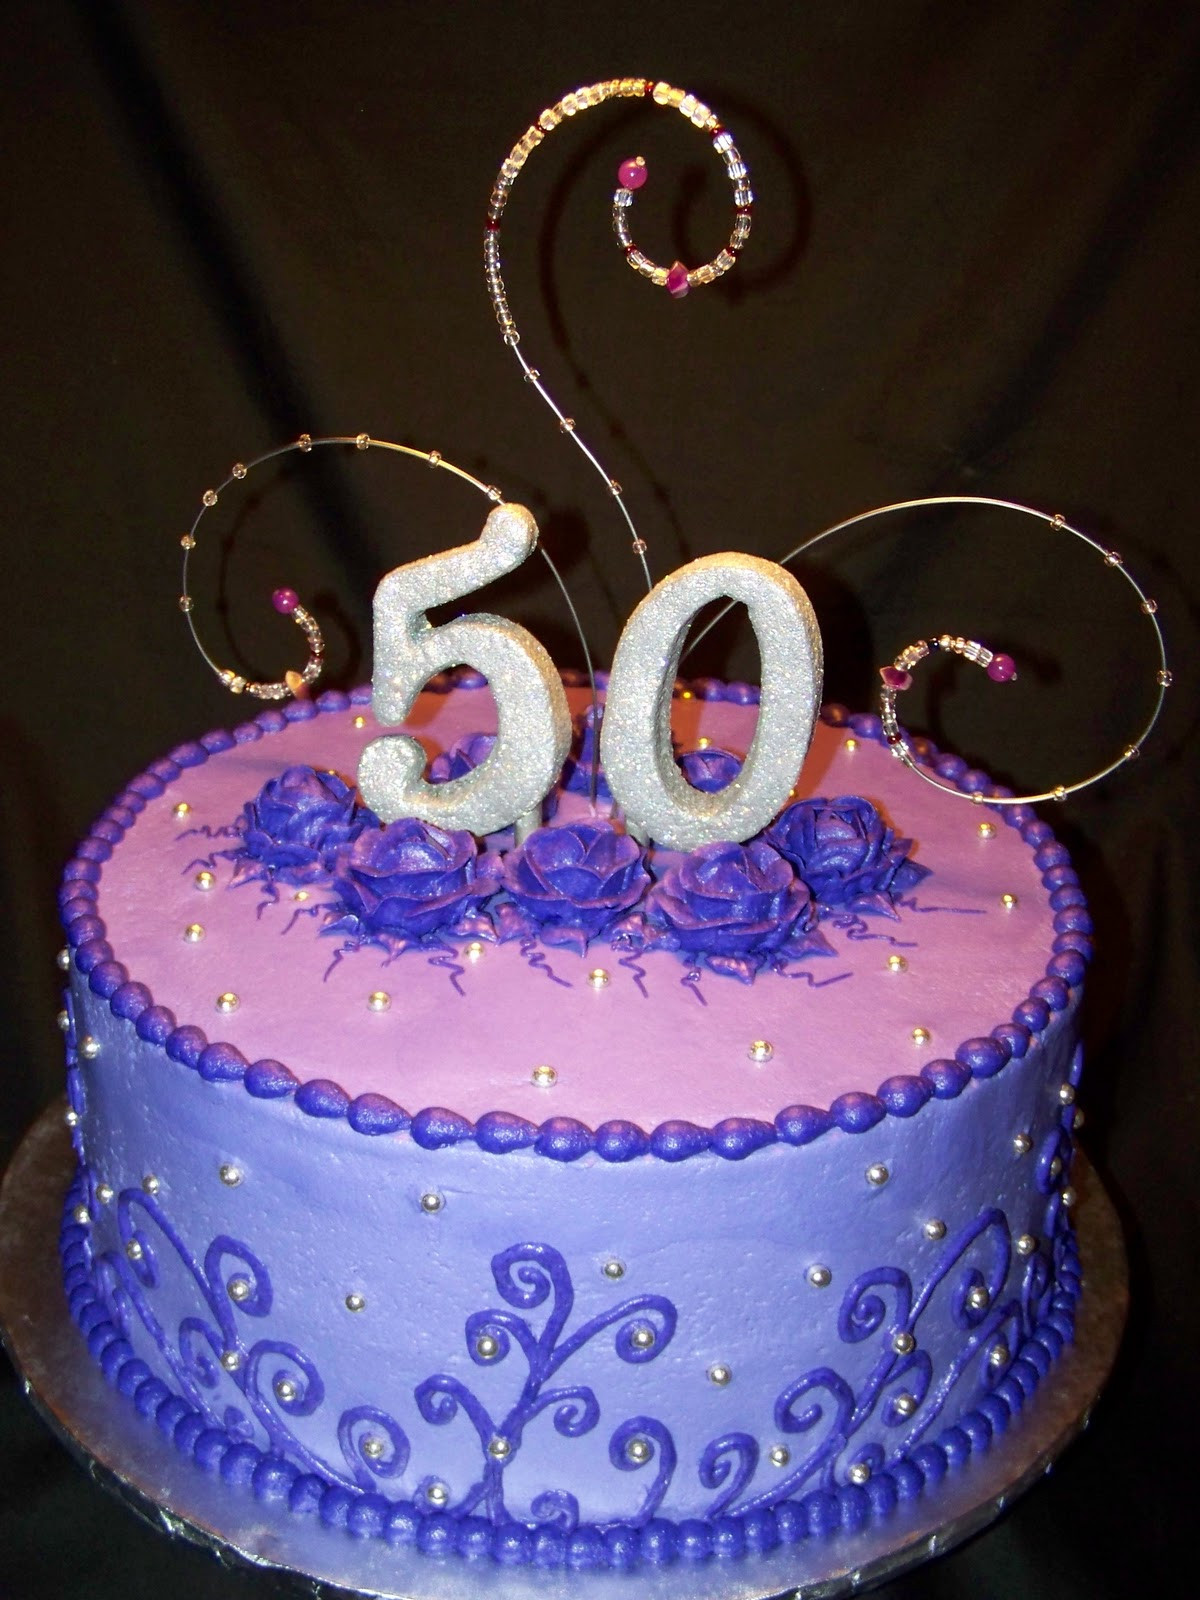 50th Birthday Cake Images
 Cakes by Kristen H Purple and Bling 50th Birthday Cake